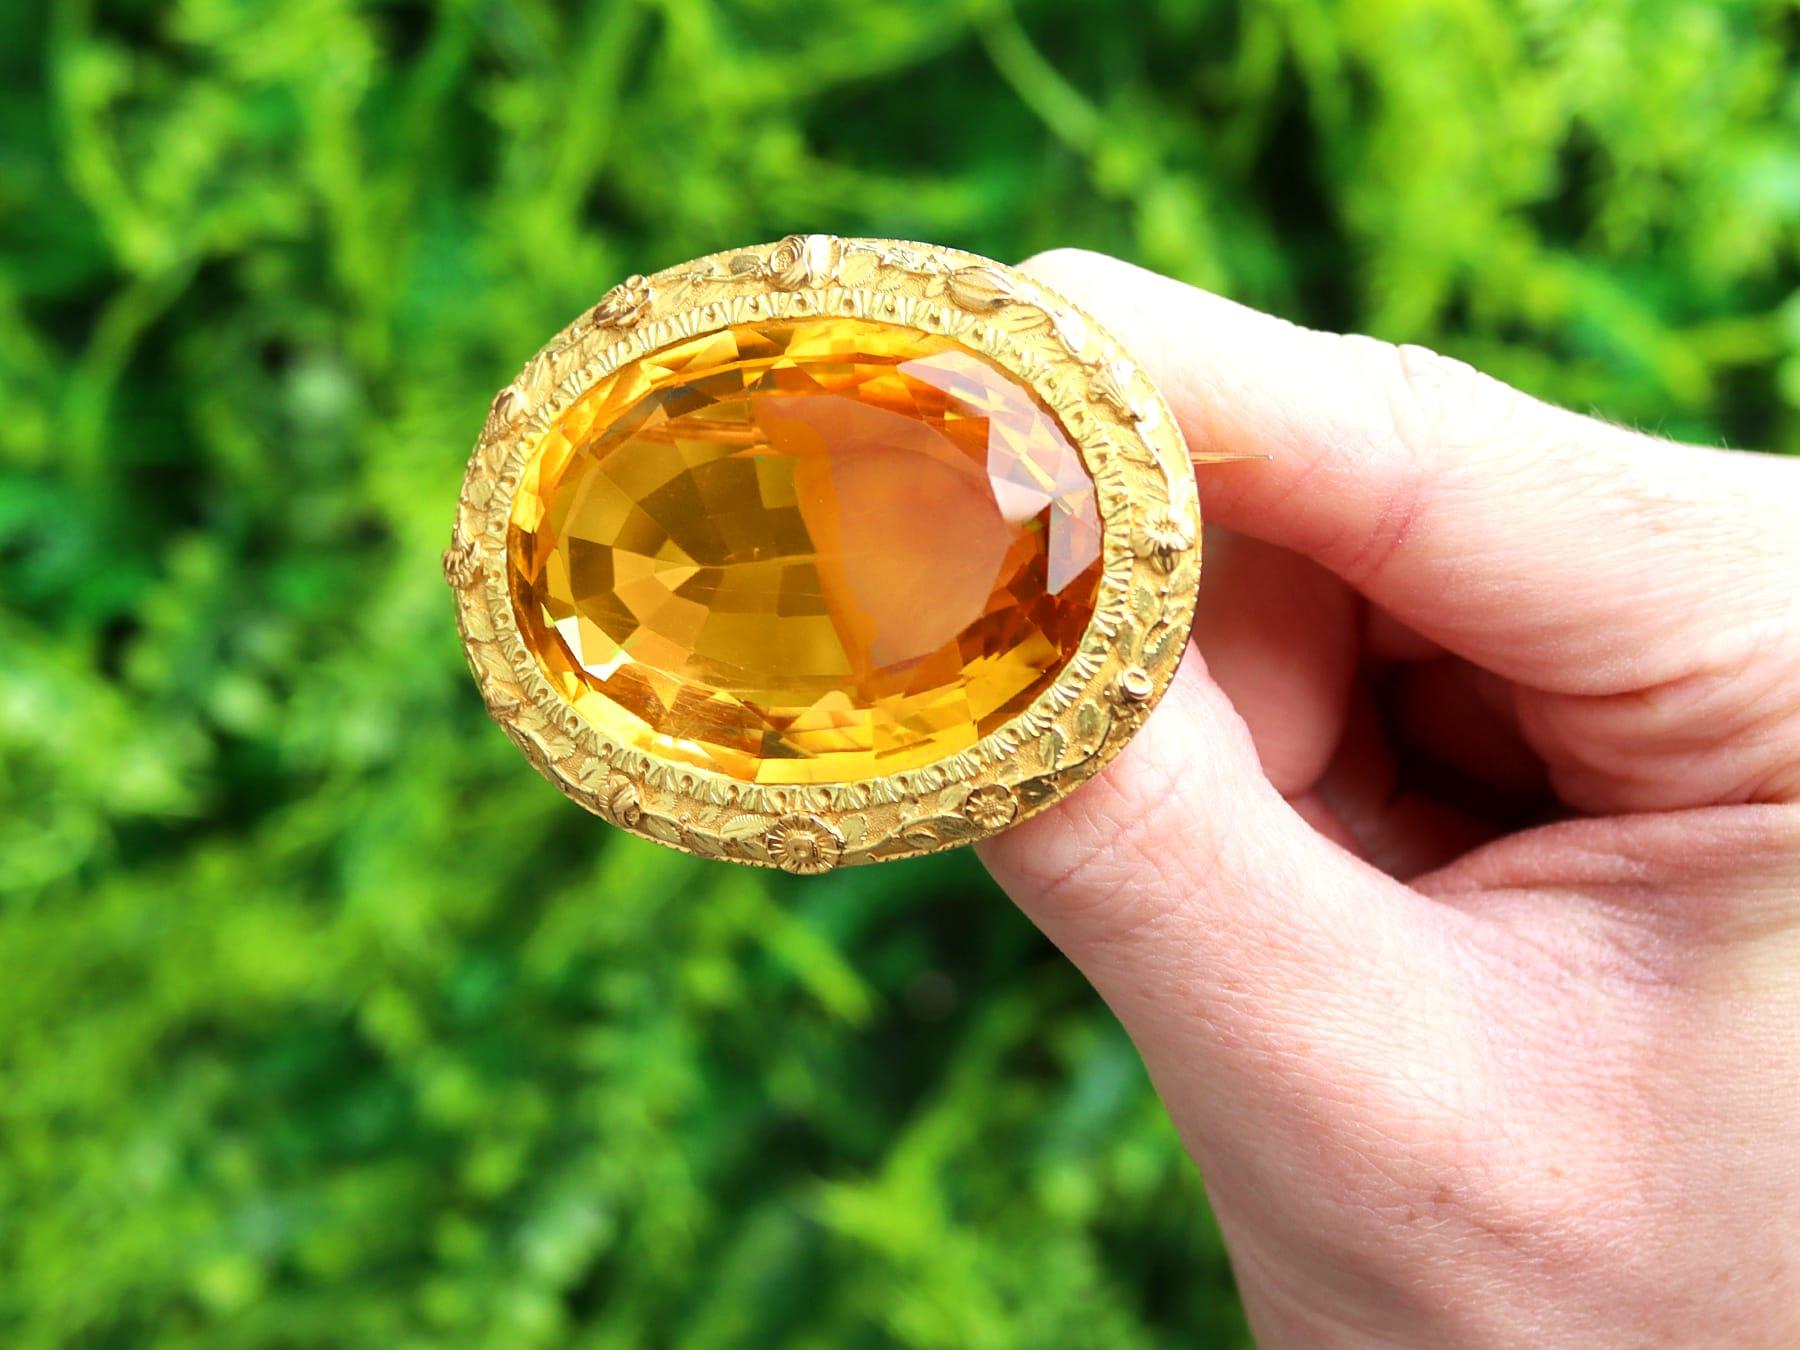 A stunning, fine and impressive, large antique Victorian 85.49 carat citrine and 18 karat yellow gold brooch; part of our diverse antique jewelry and estate jewelry collections

This stunning and large Victorian brooch has been crafted in 18k yellow